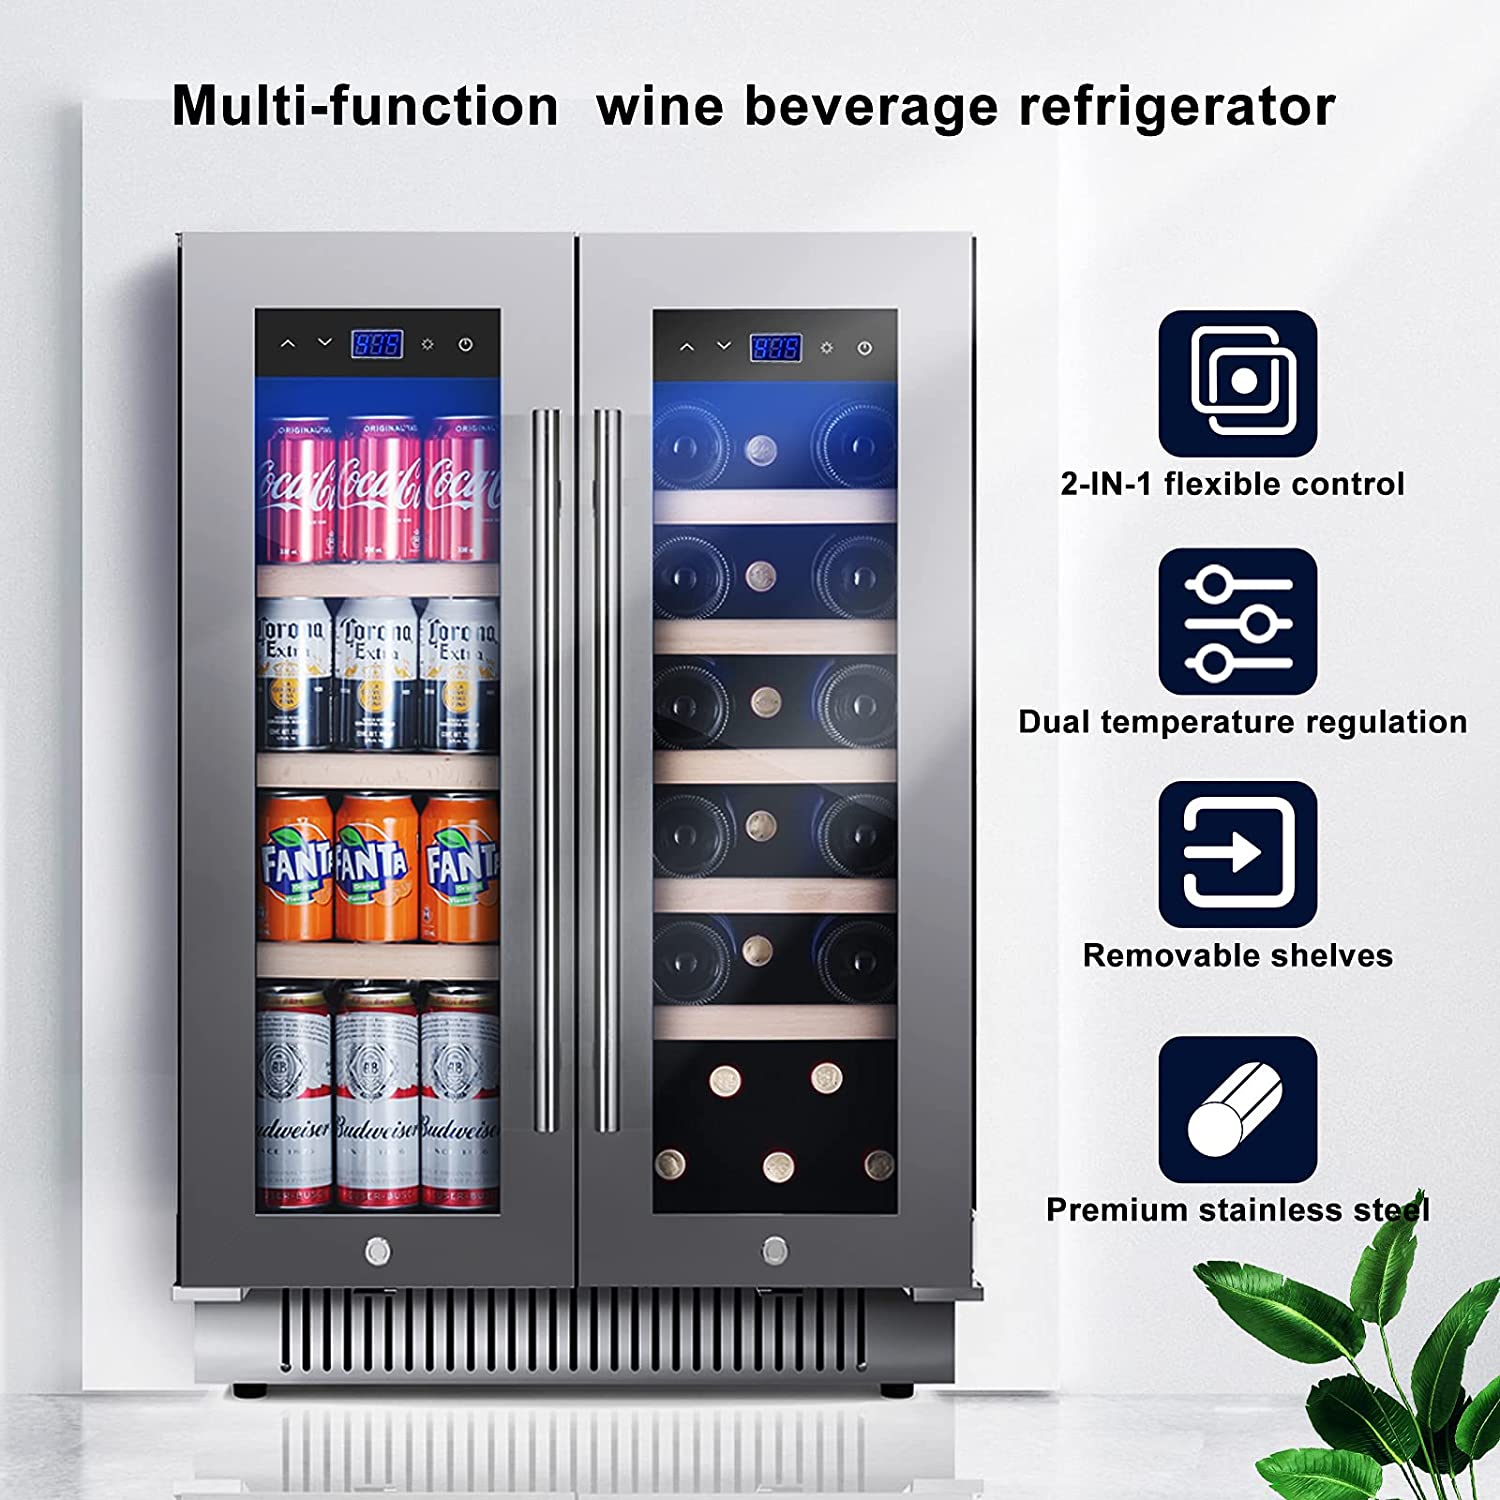 10 Best 15 Inch Wine Cooler Refrigerator 2022 Review: Top Small Undercounter Built-in Wine Fridges All In One Cooling Gear Lab: Any Refrigerators Air Conditioners Freezers Ice Makers Coolers Fans Reviewed And Compared.